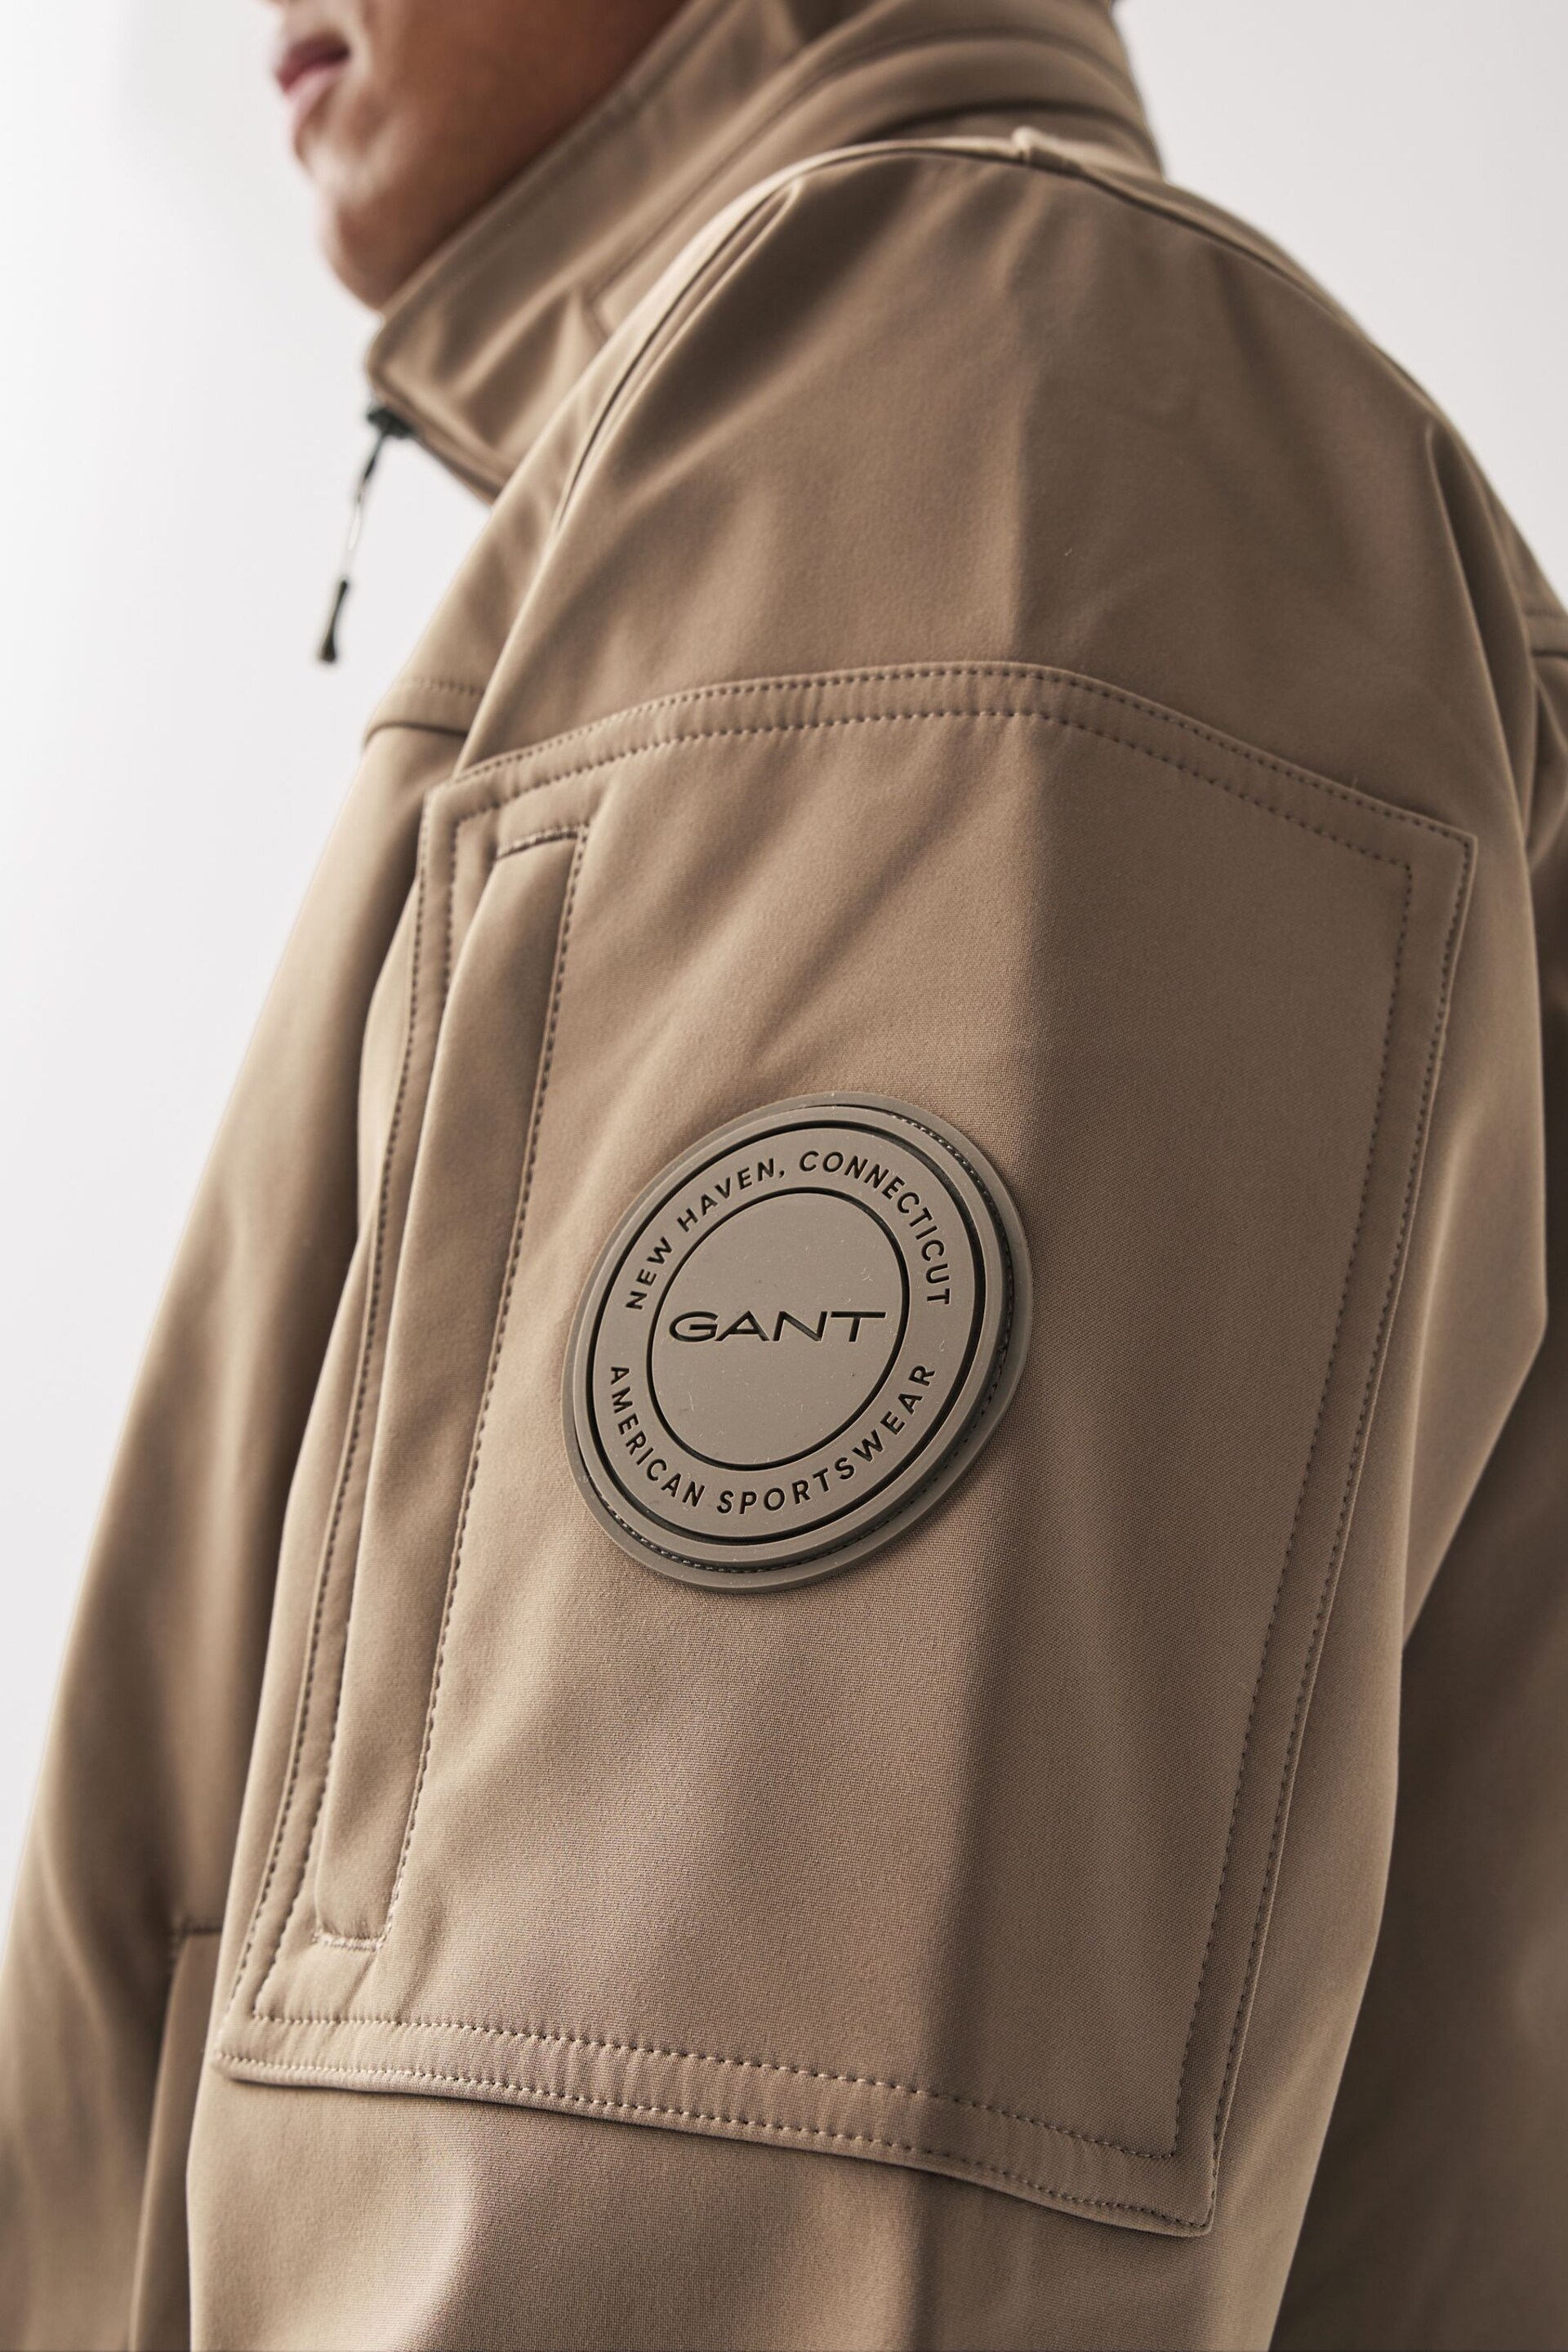 GANT Soft Shell Water Repellent Jacket - Image 3 of 8